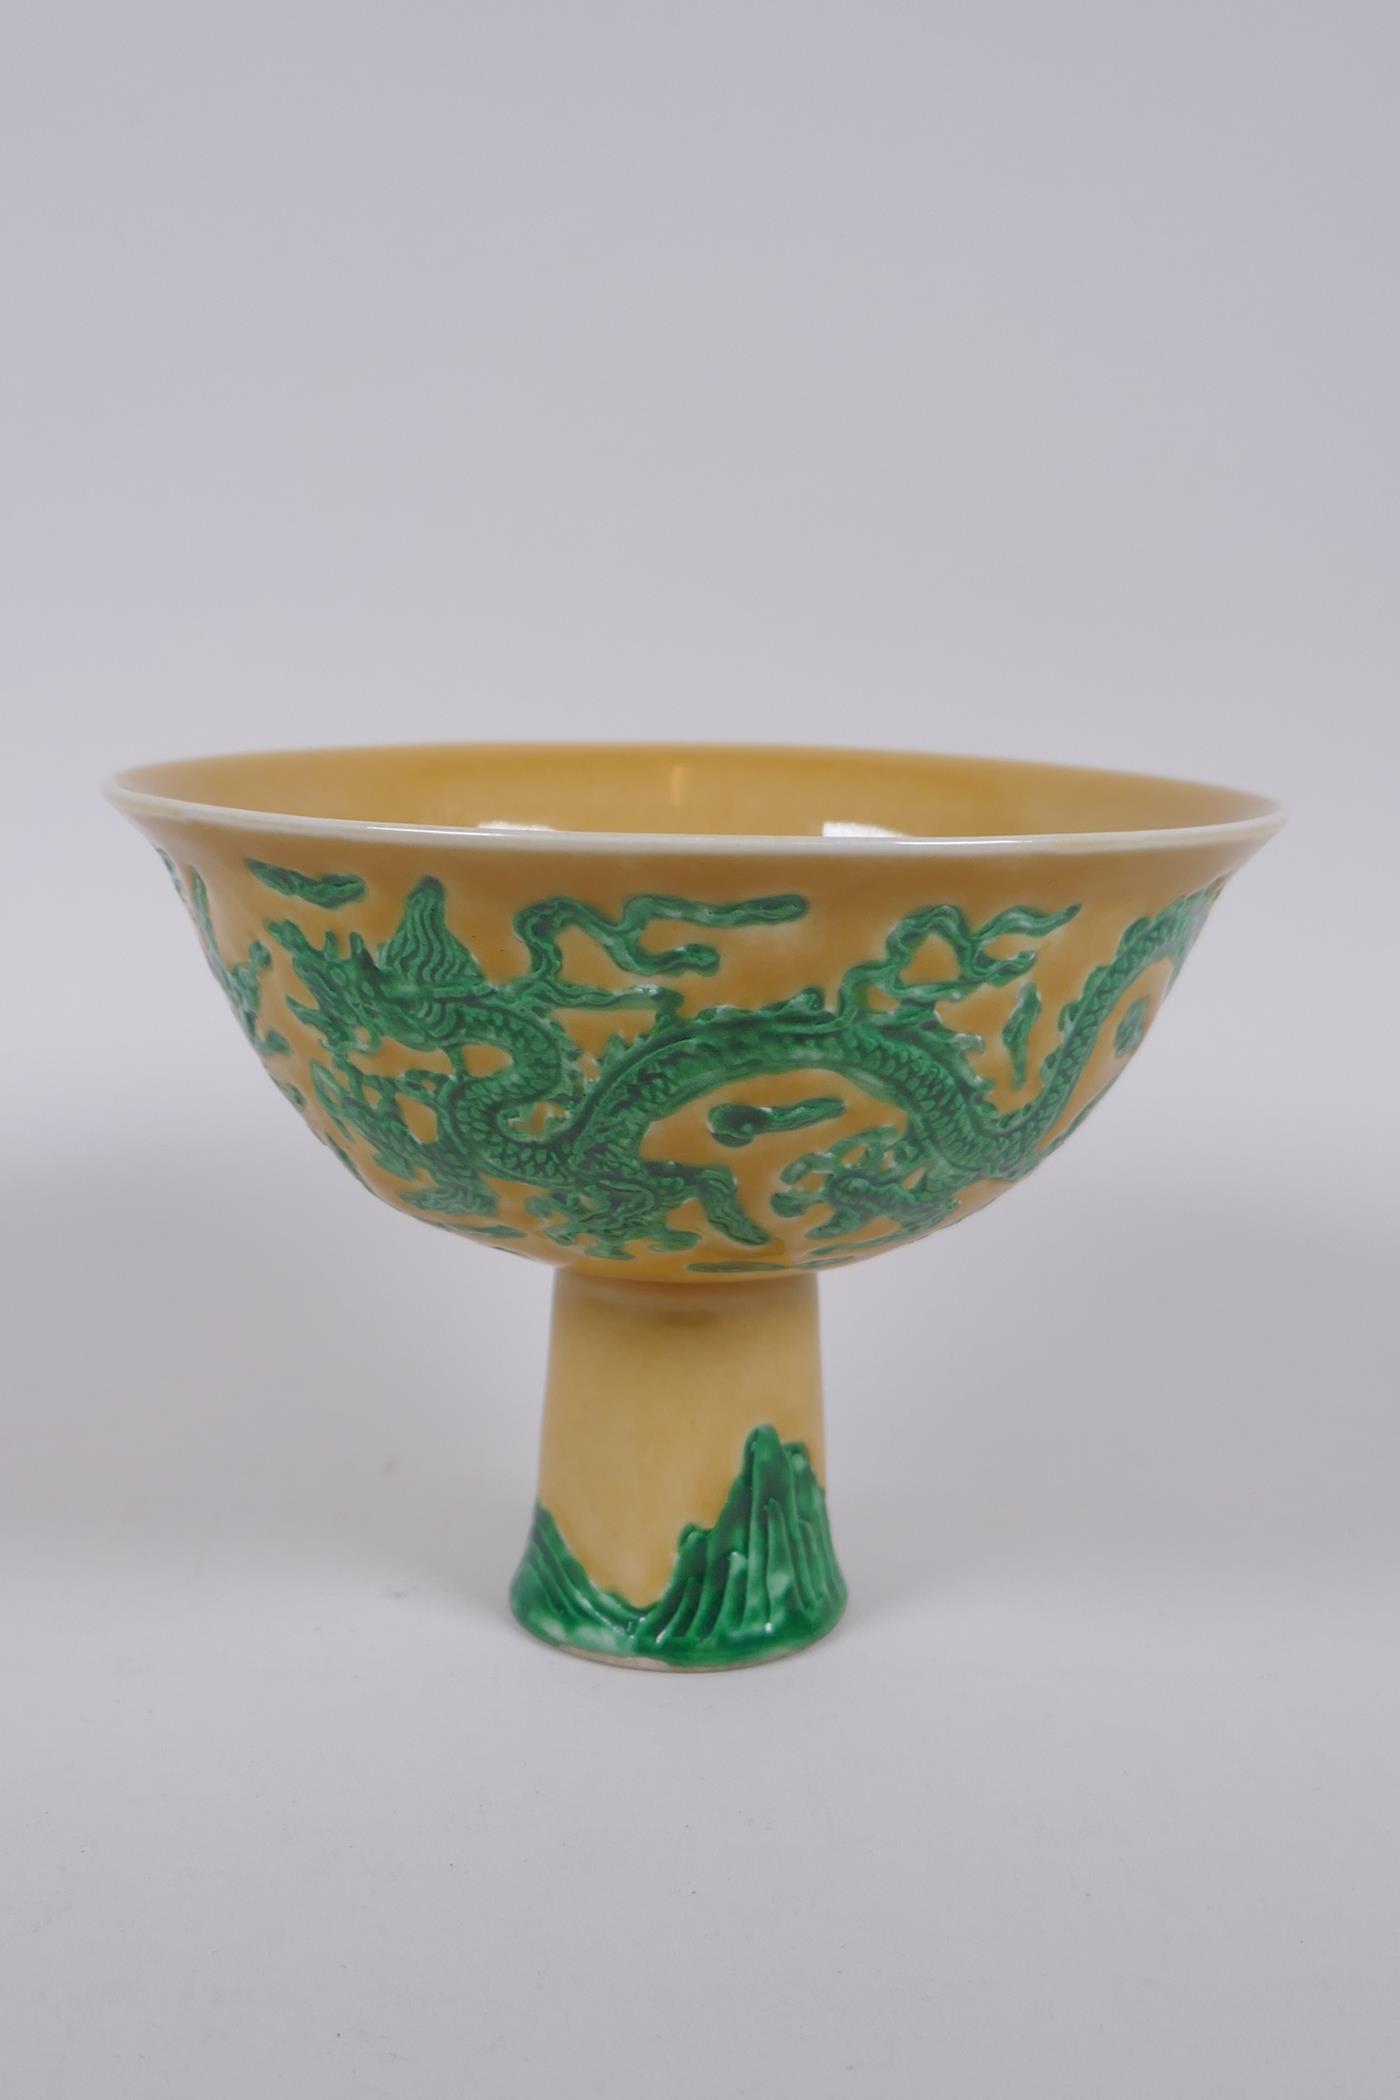 A Chinese yellow ground porcelain stem bowl with raised green enamelled dragon decoration, Xuande